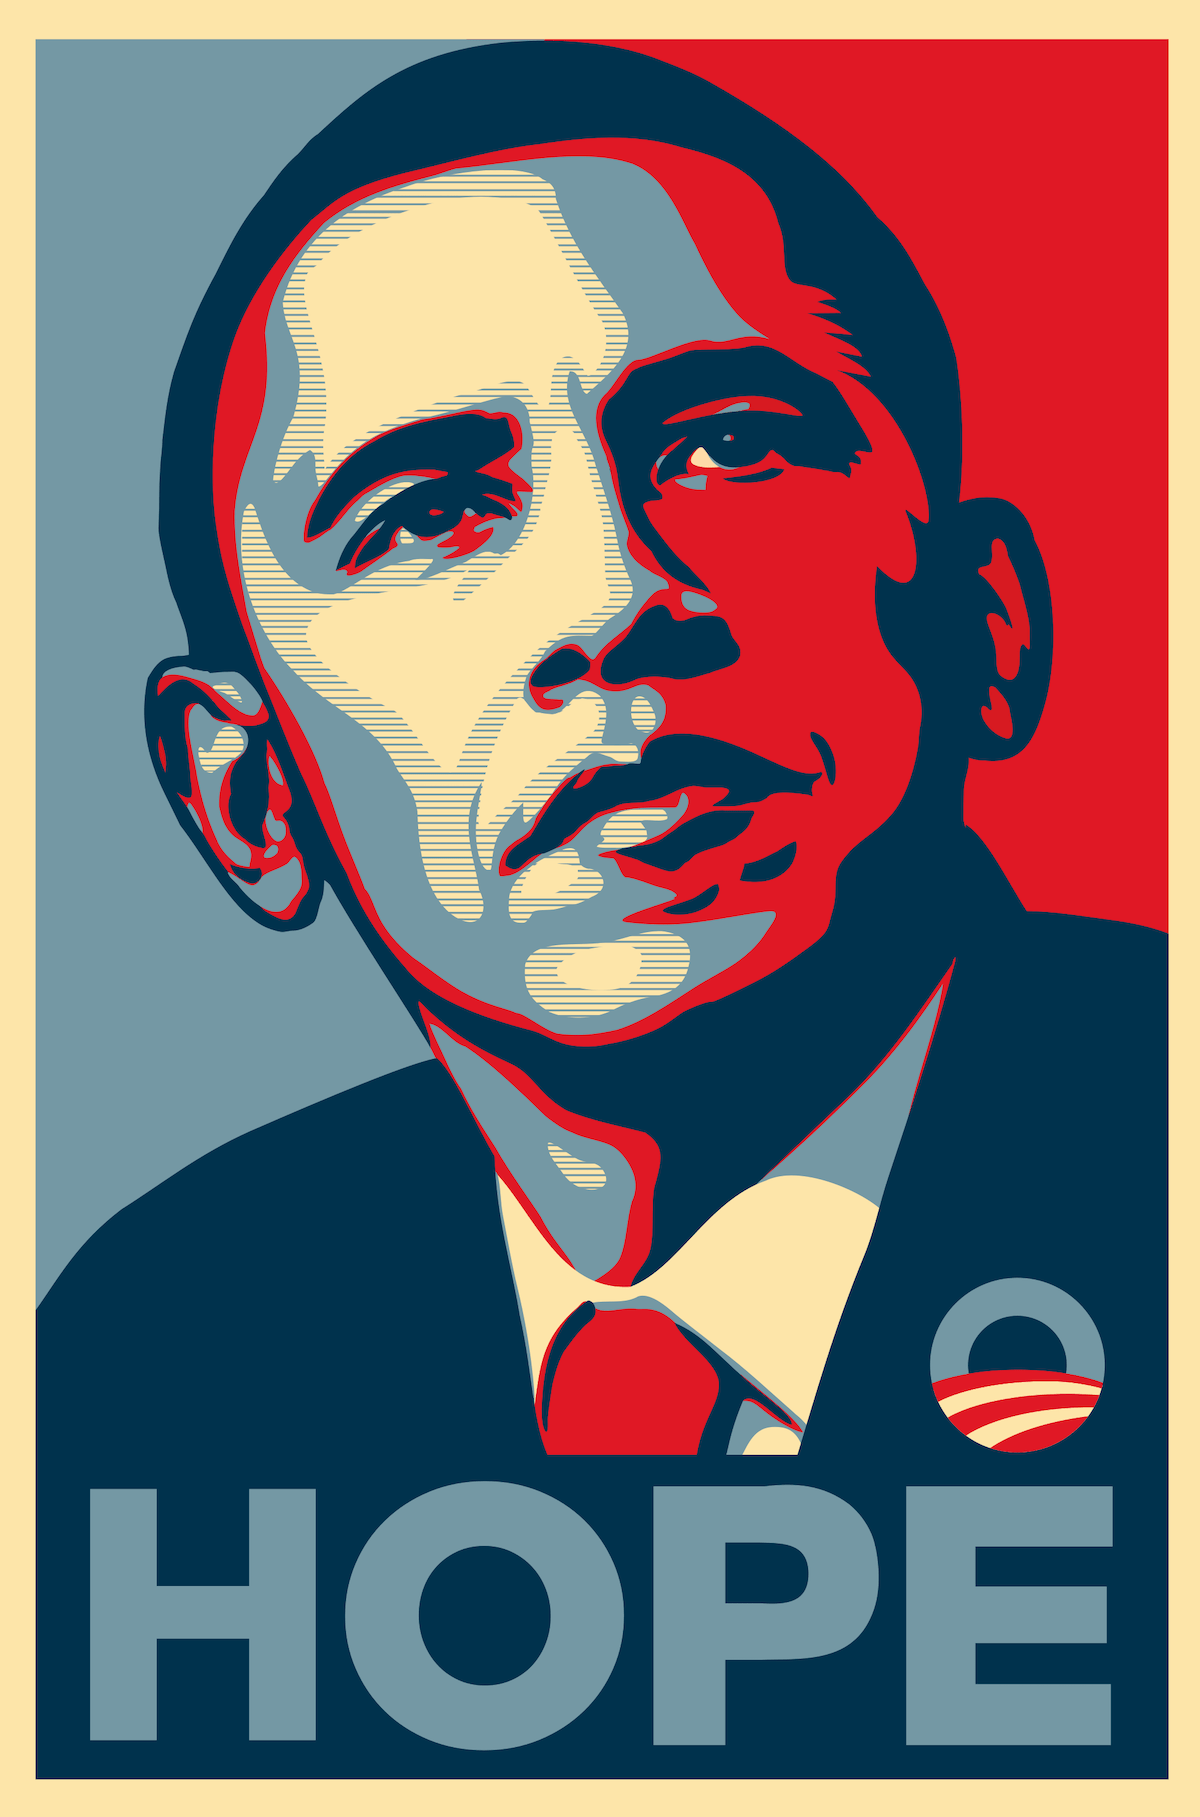 A red, white, and blue vector portrait of Barack Obama dressed in a suit with his 2008 campaign logo on the lapel. The word HOPE sits beneath Obama’s portrait.